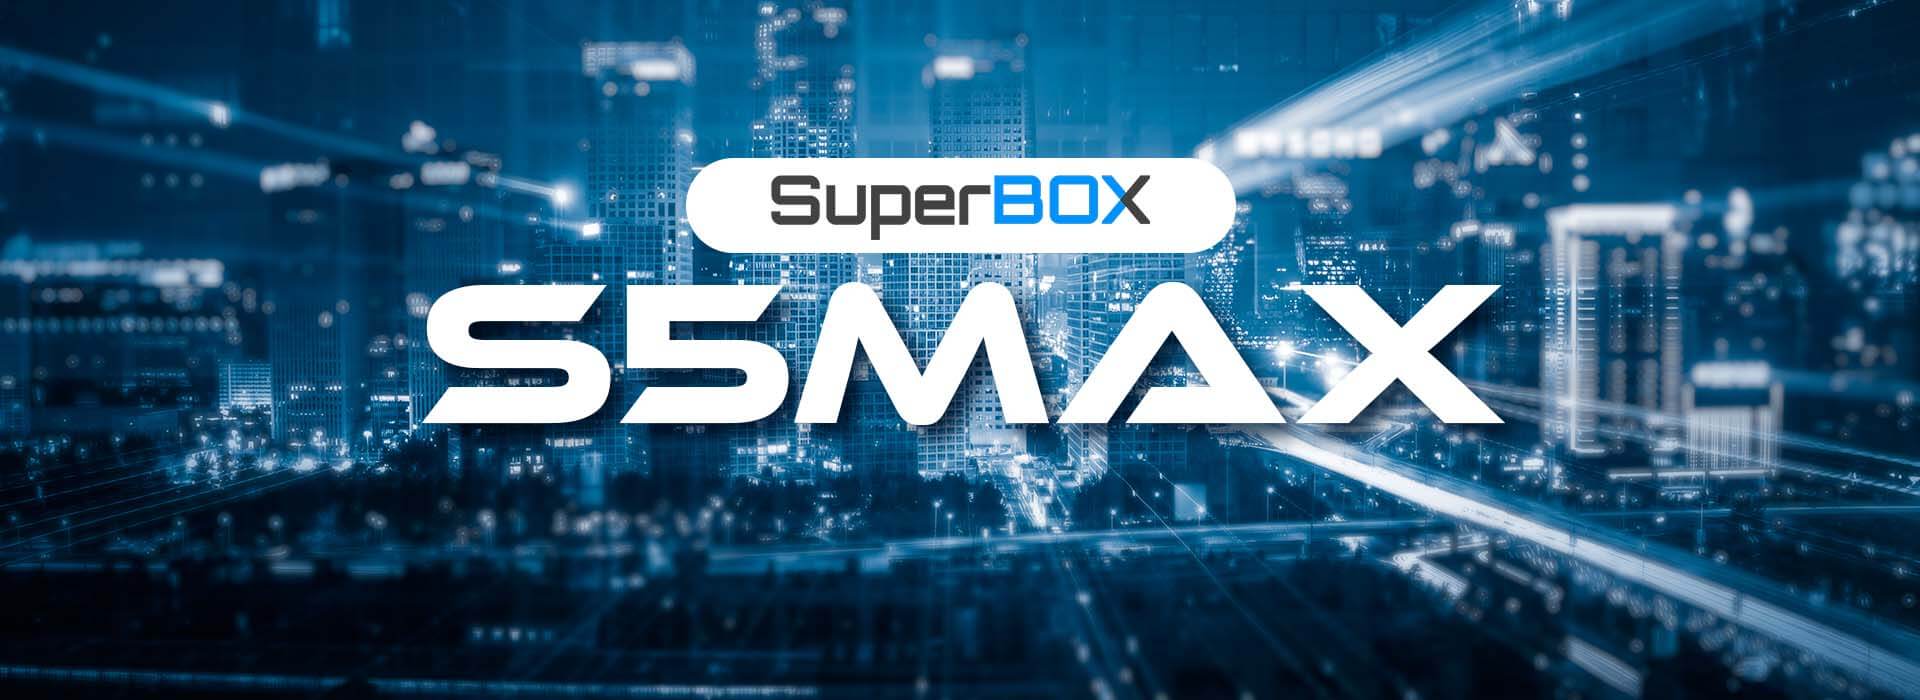 Cover image of the blog post "Superbox S5 Max User Guide"